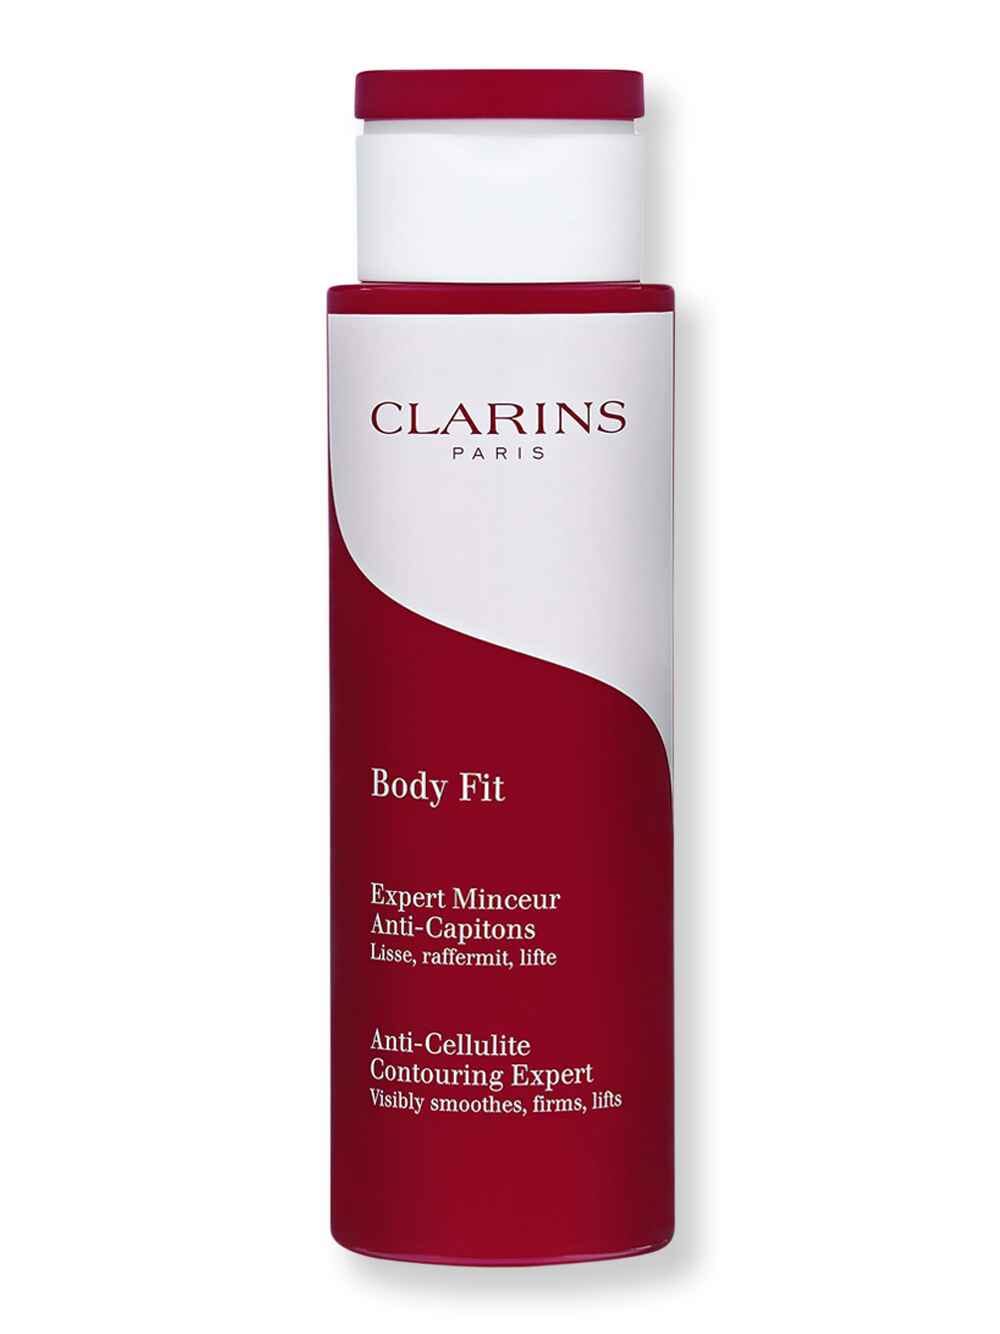 Clarins Clarins Body Fit Anti-Cellulite Contouring & Firming Expert 6.9 oz200 ml Cellulite Treatments 